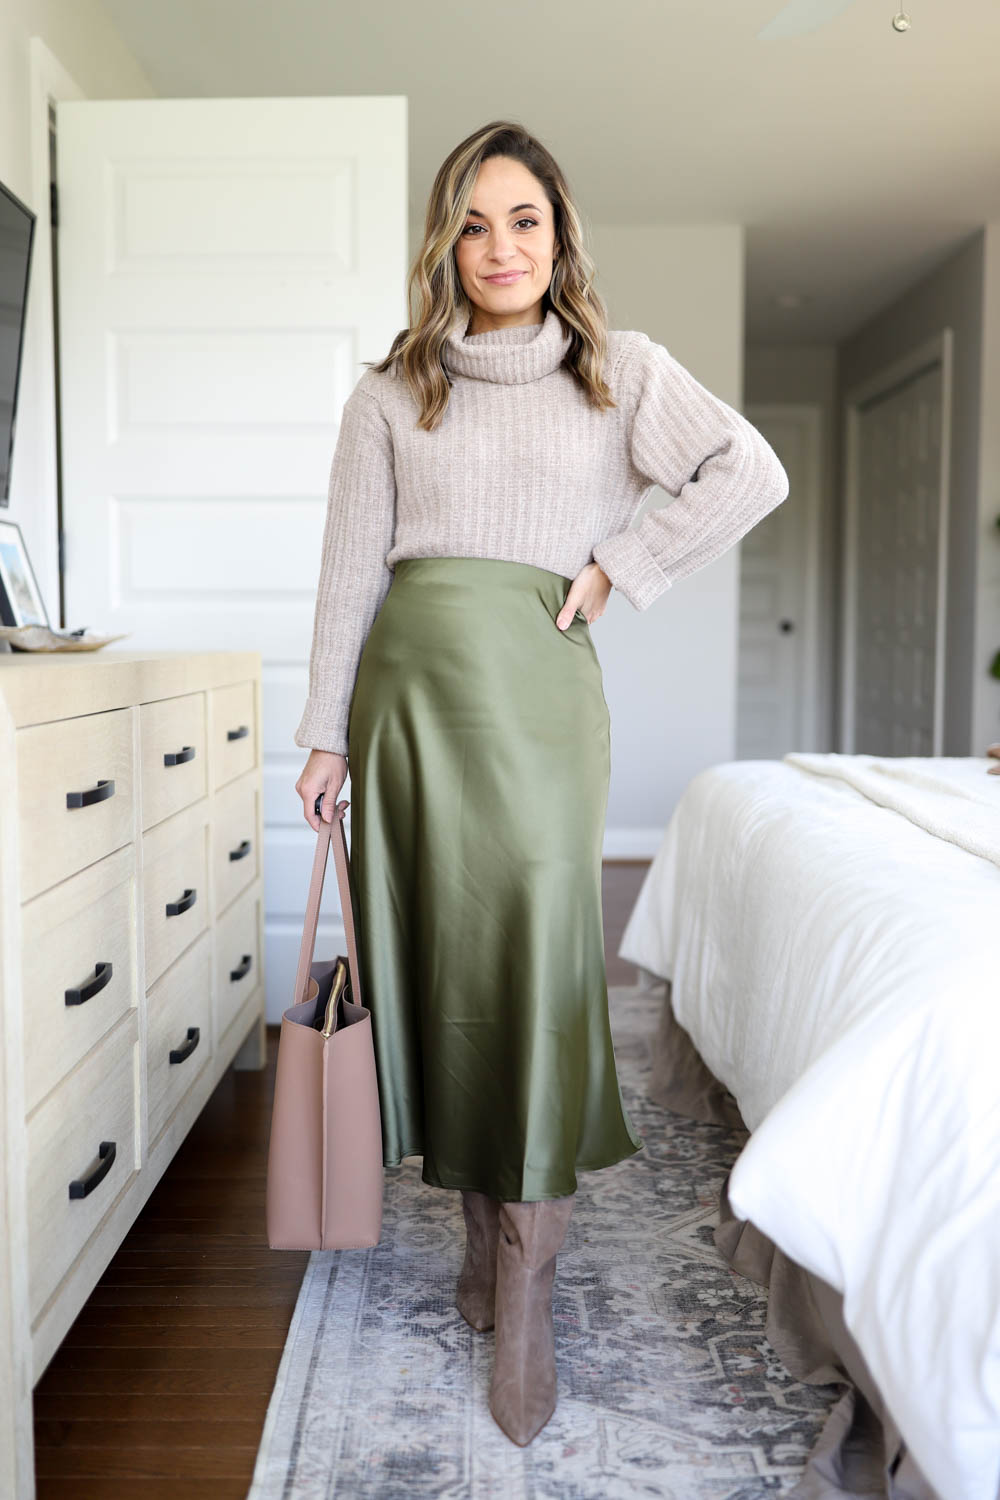 One Week of Outfits for Work - Pumps & Push Ups